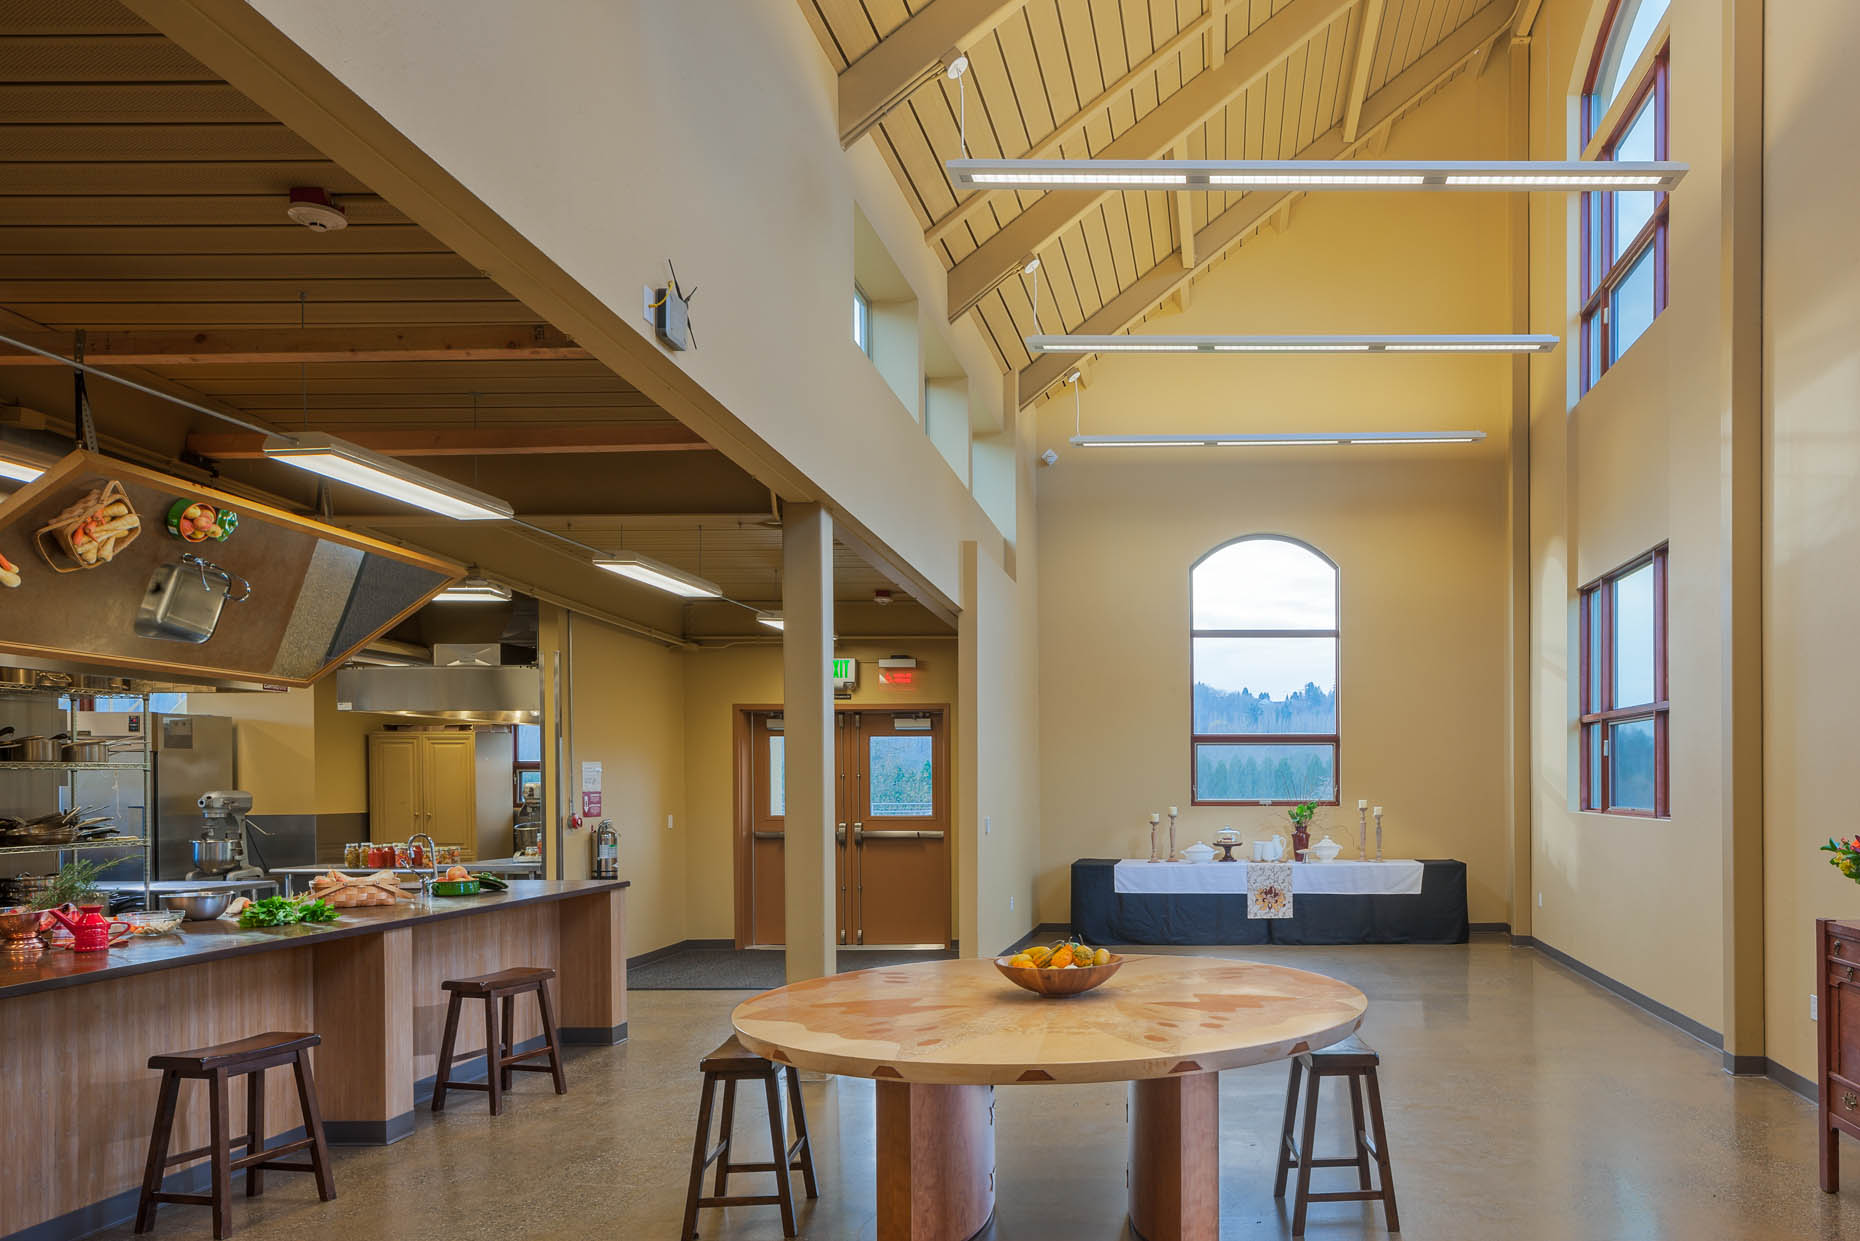 Commercial kitchen at the 21 Acres Center for Local Food and Sustainable Living (Photo credit: Sozinho Imagery)